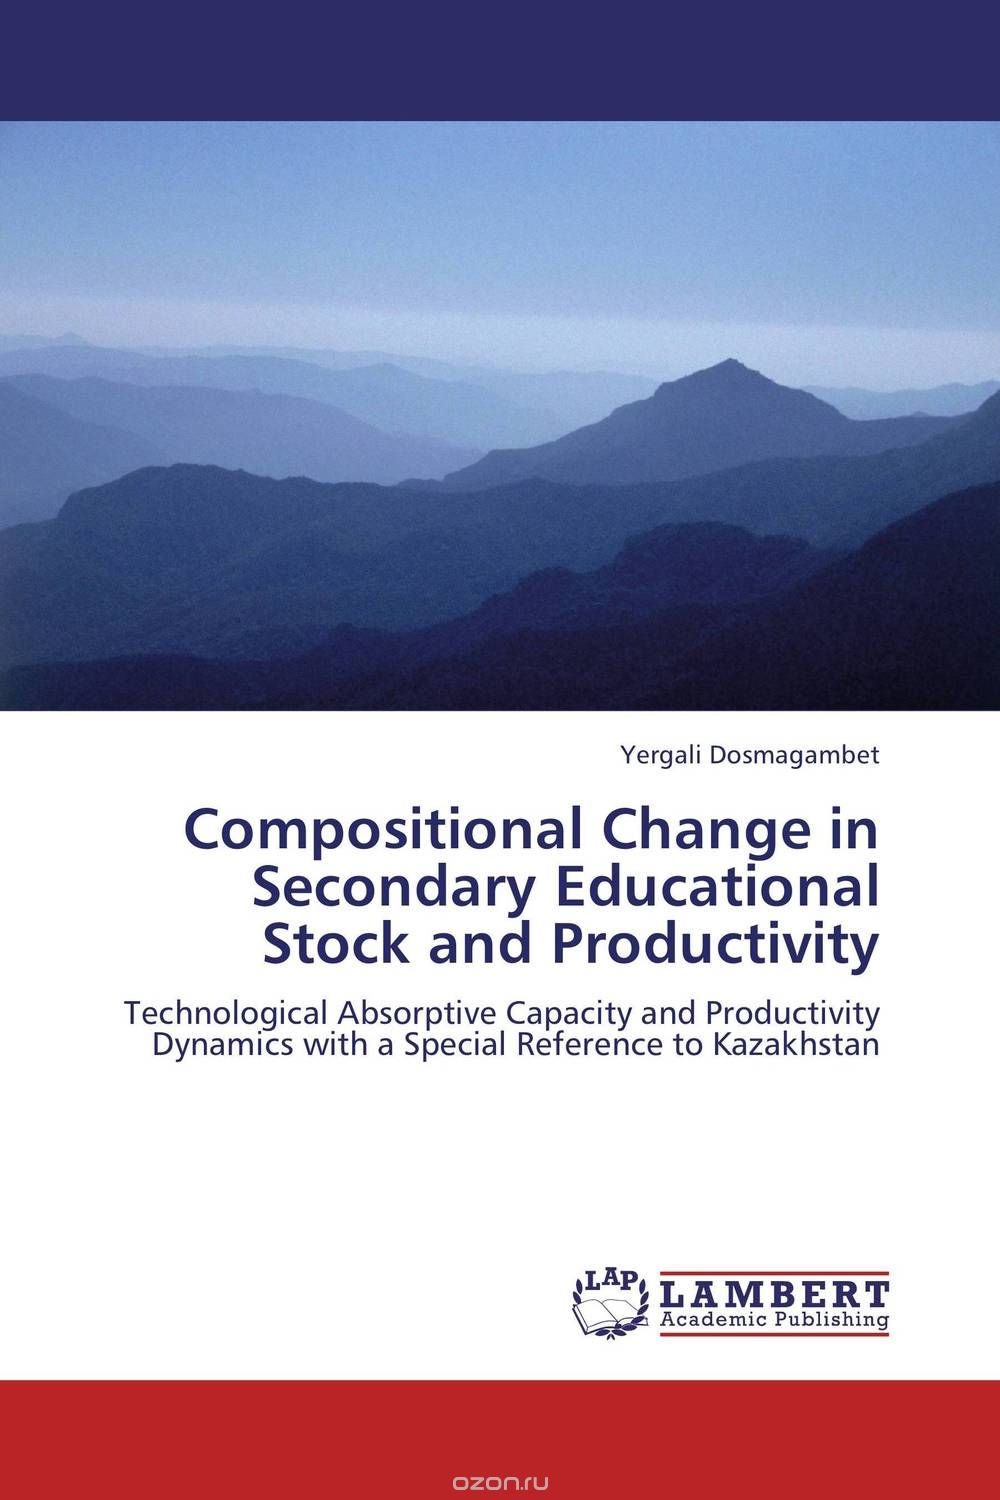 Compositional Change in Secondary Educational Stock and Productivity